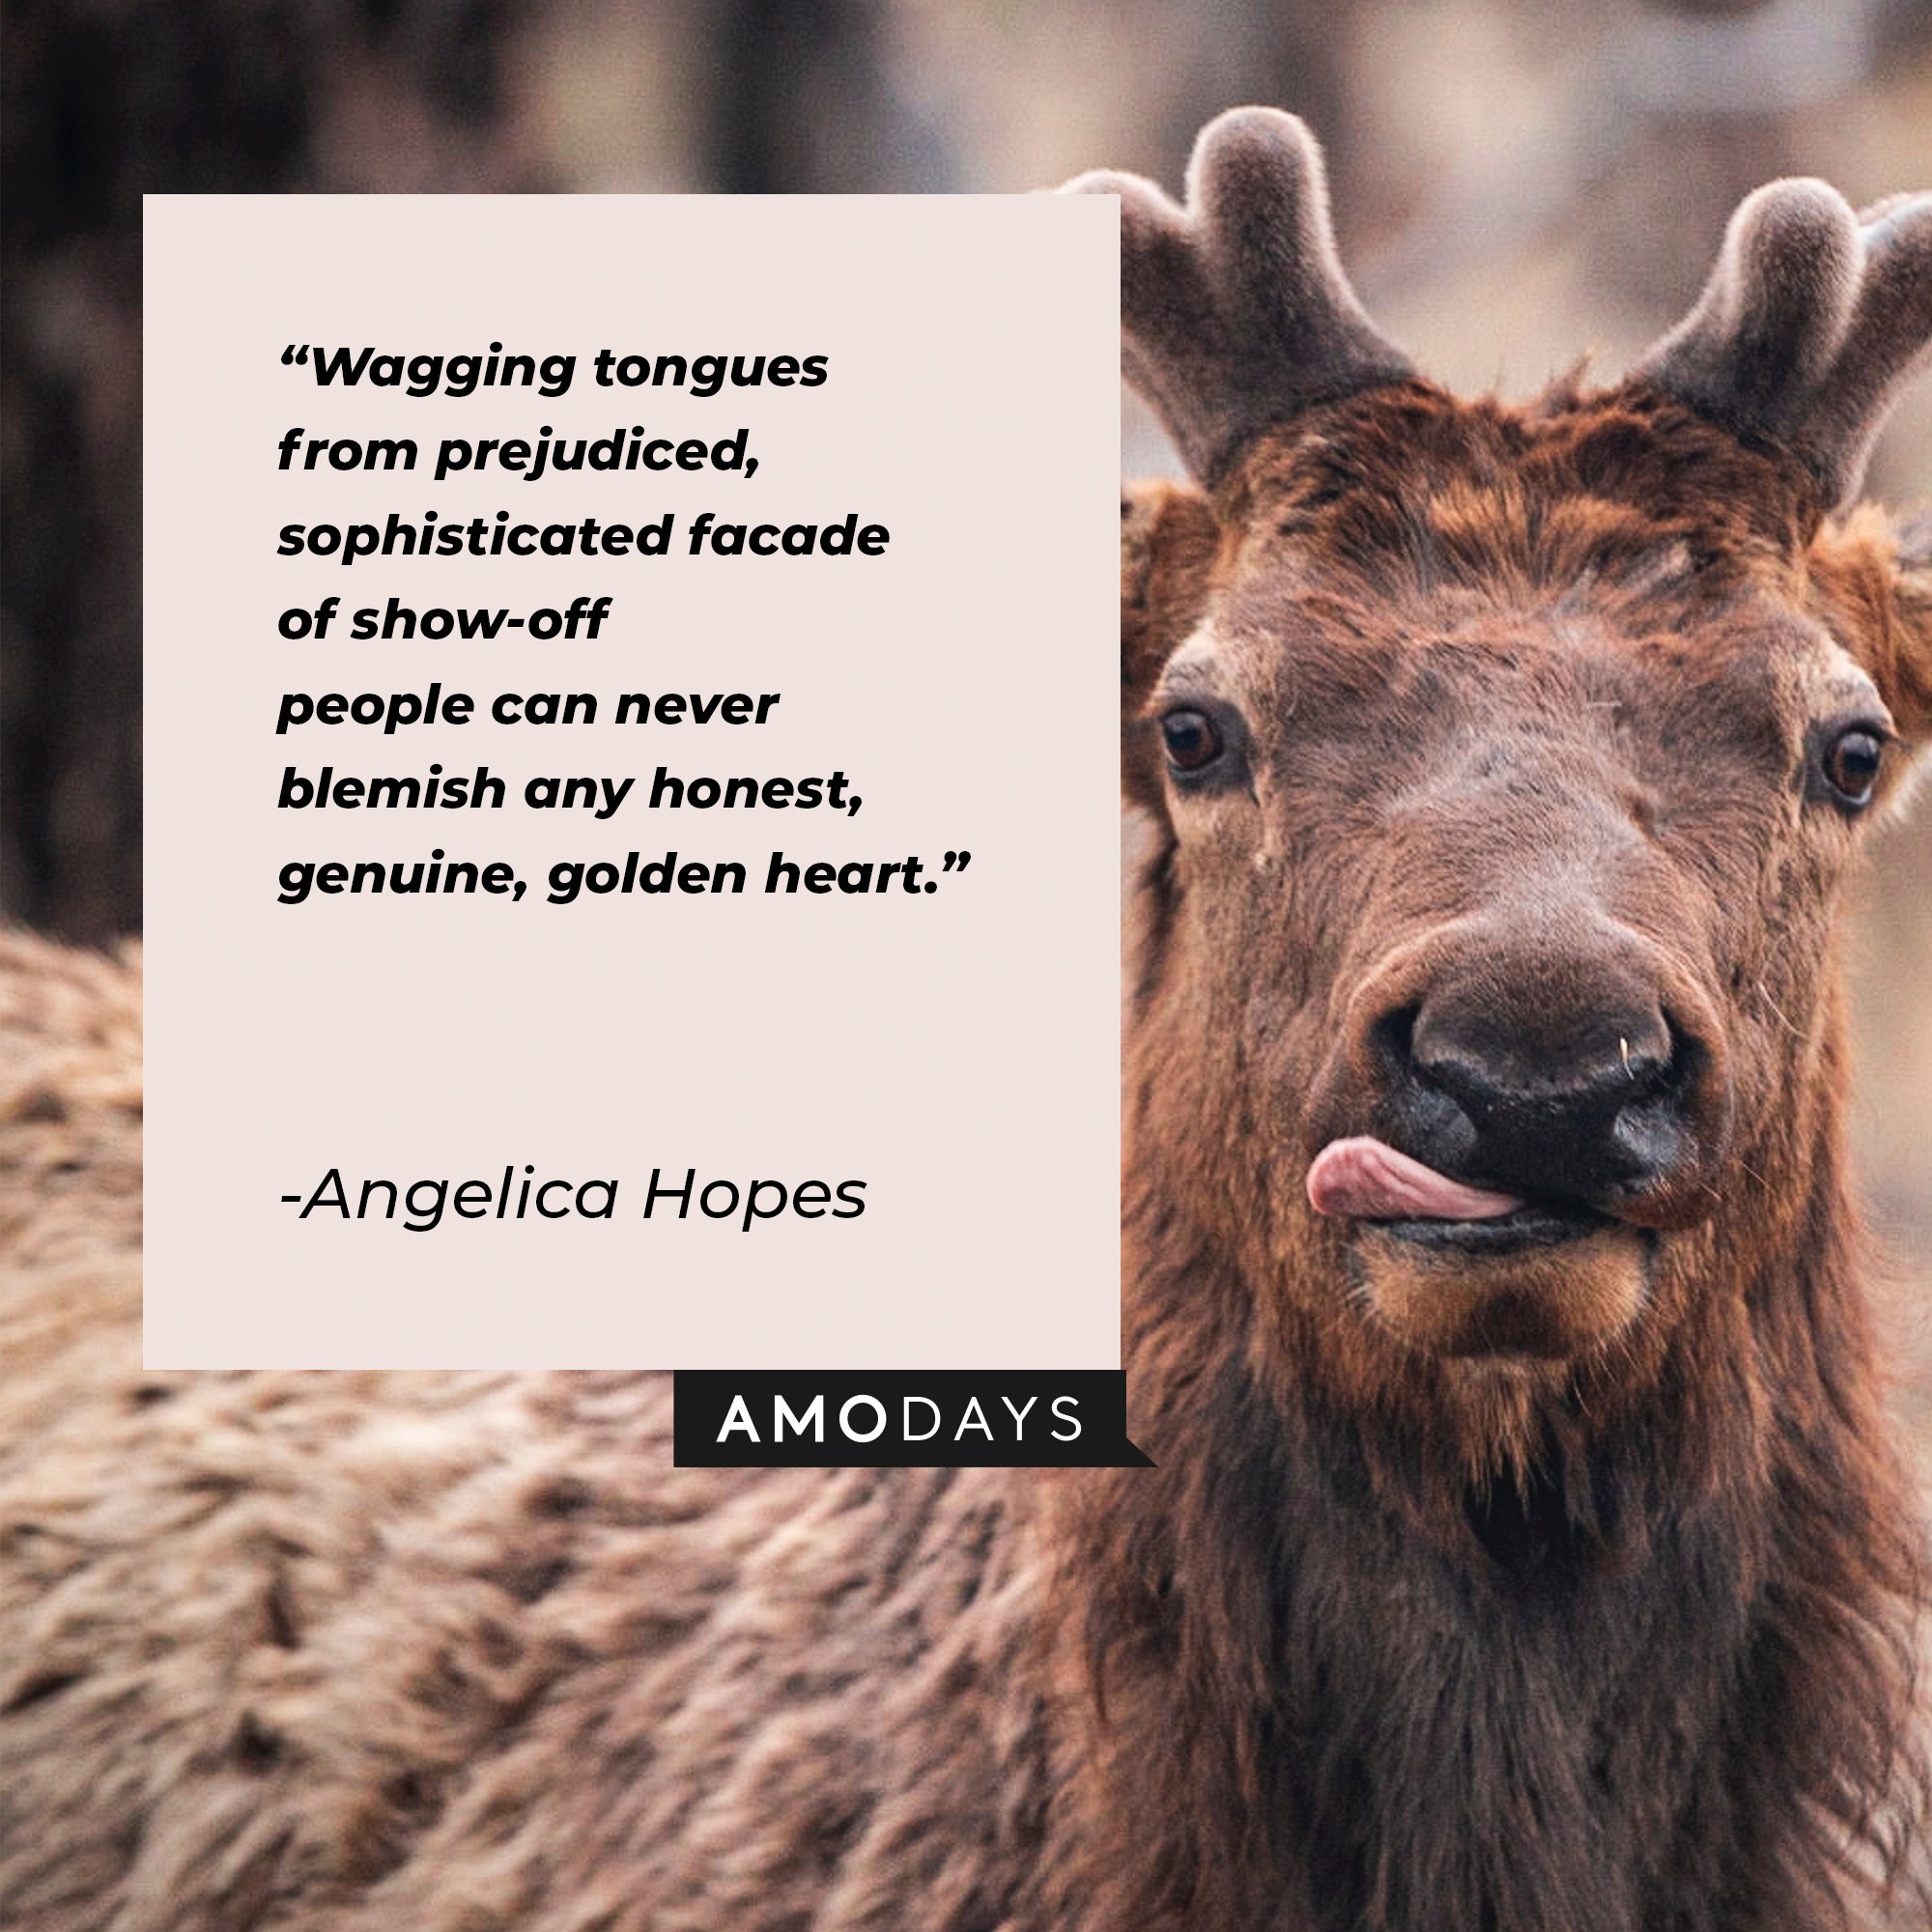 Angelica Hopes' quote: "Wagging tongues from prejudiced, sophisticated facade of show-off people can never blemish any honest, genuine, golden heart." | Image: AmoDays